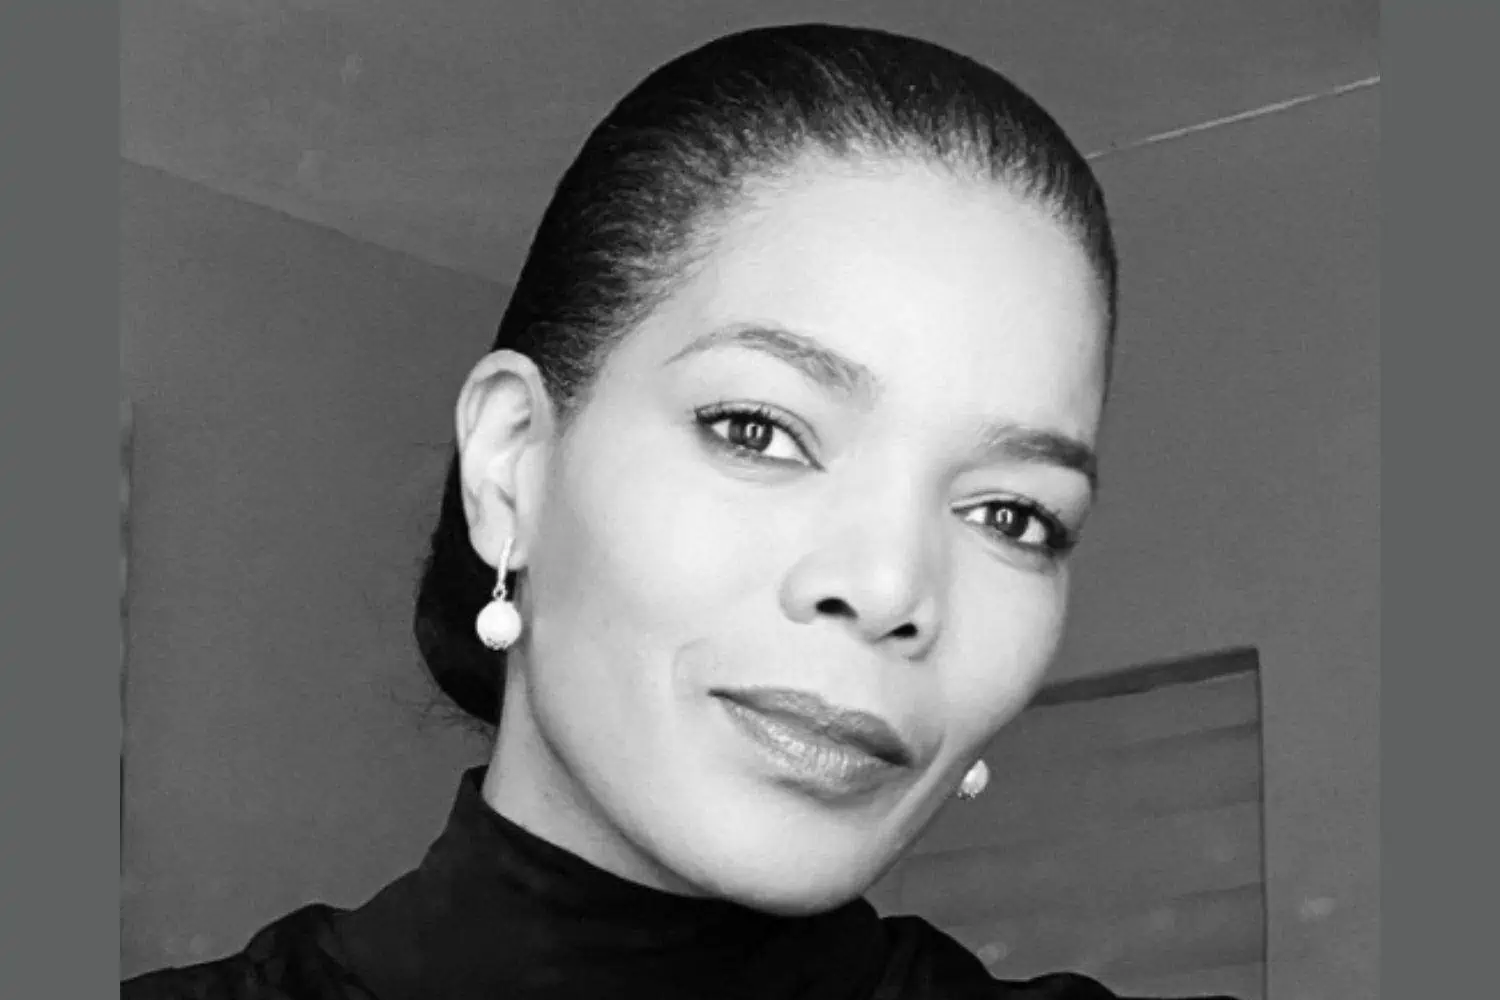 "Prophet" triggers Connie Ferguson as he claims she has cancer